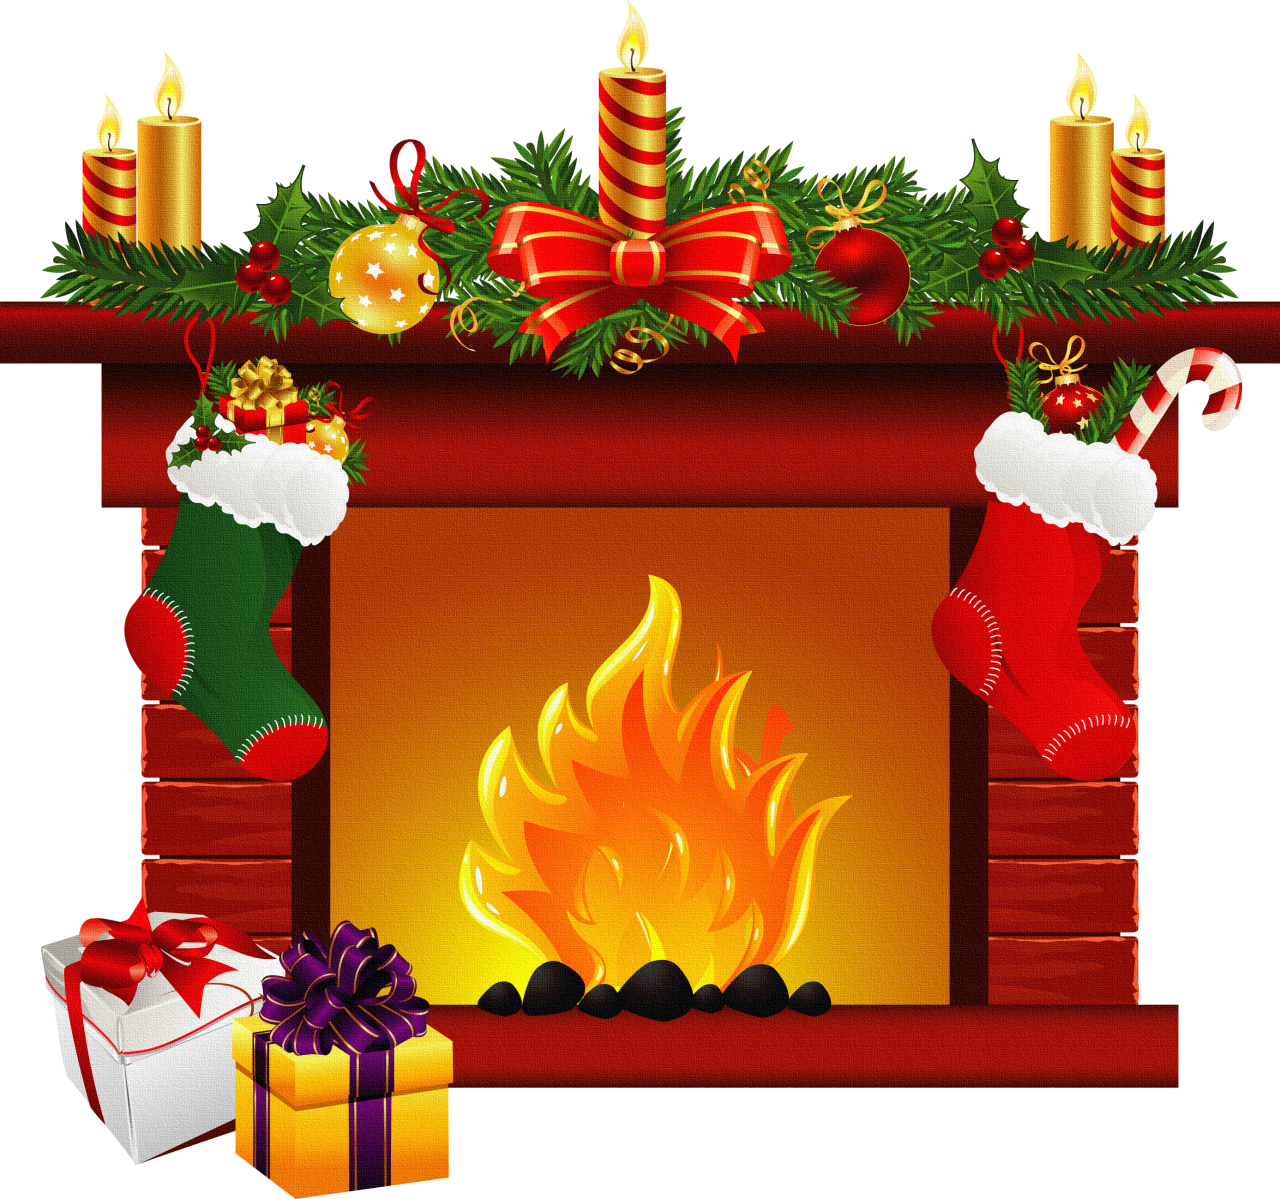 Fireplace Clipart - Christmas Fireplace Clipart (1280x1199)